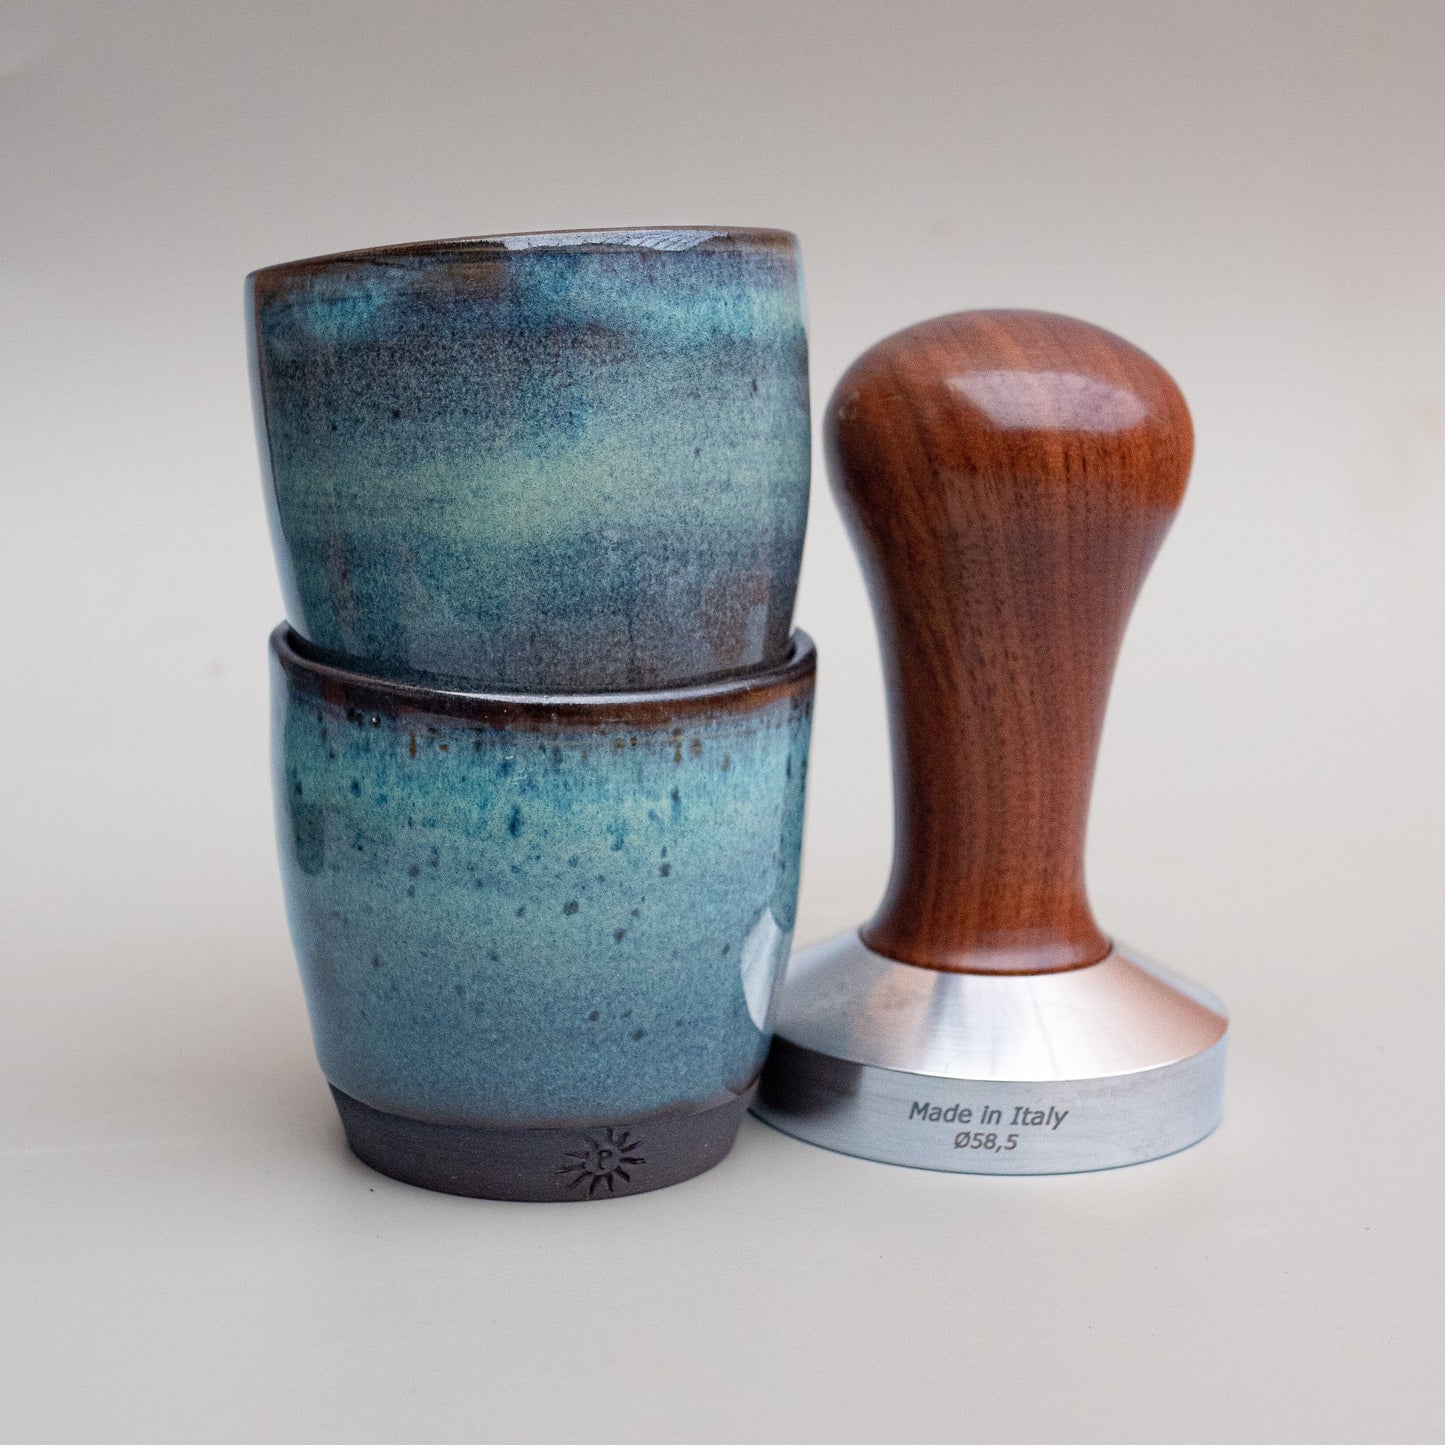 Espresso cups, next to coffee tamper for scale